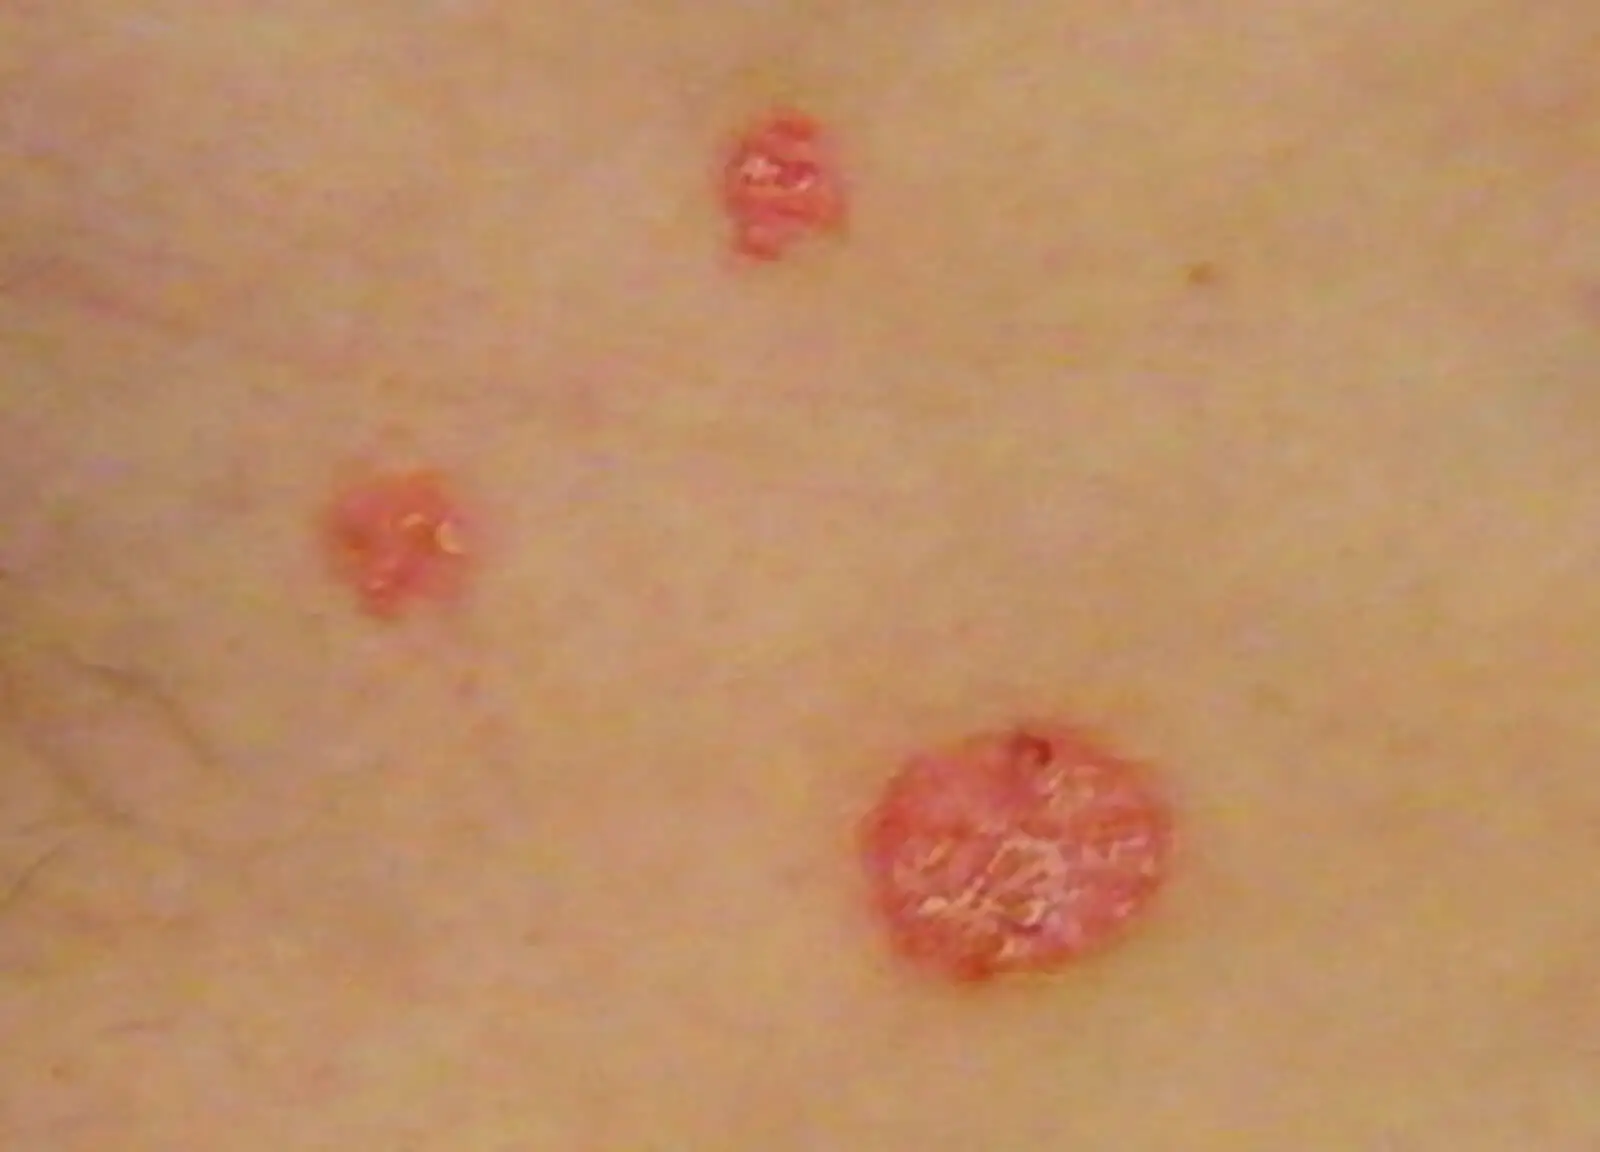 Psoriasis On The Skin Of The Lower Abdomen